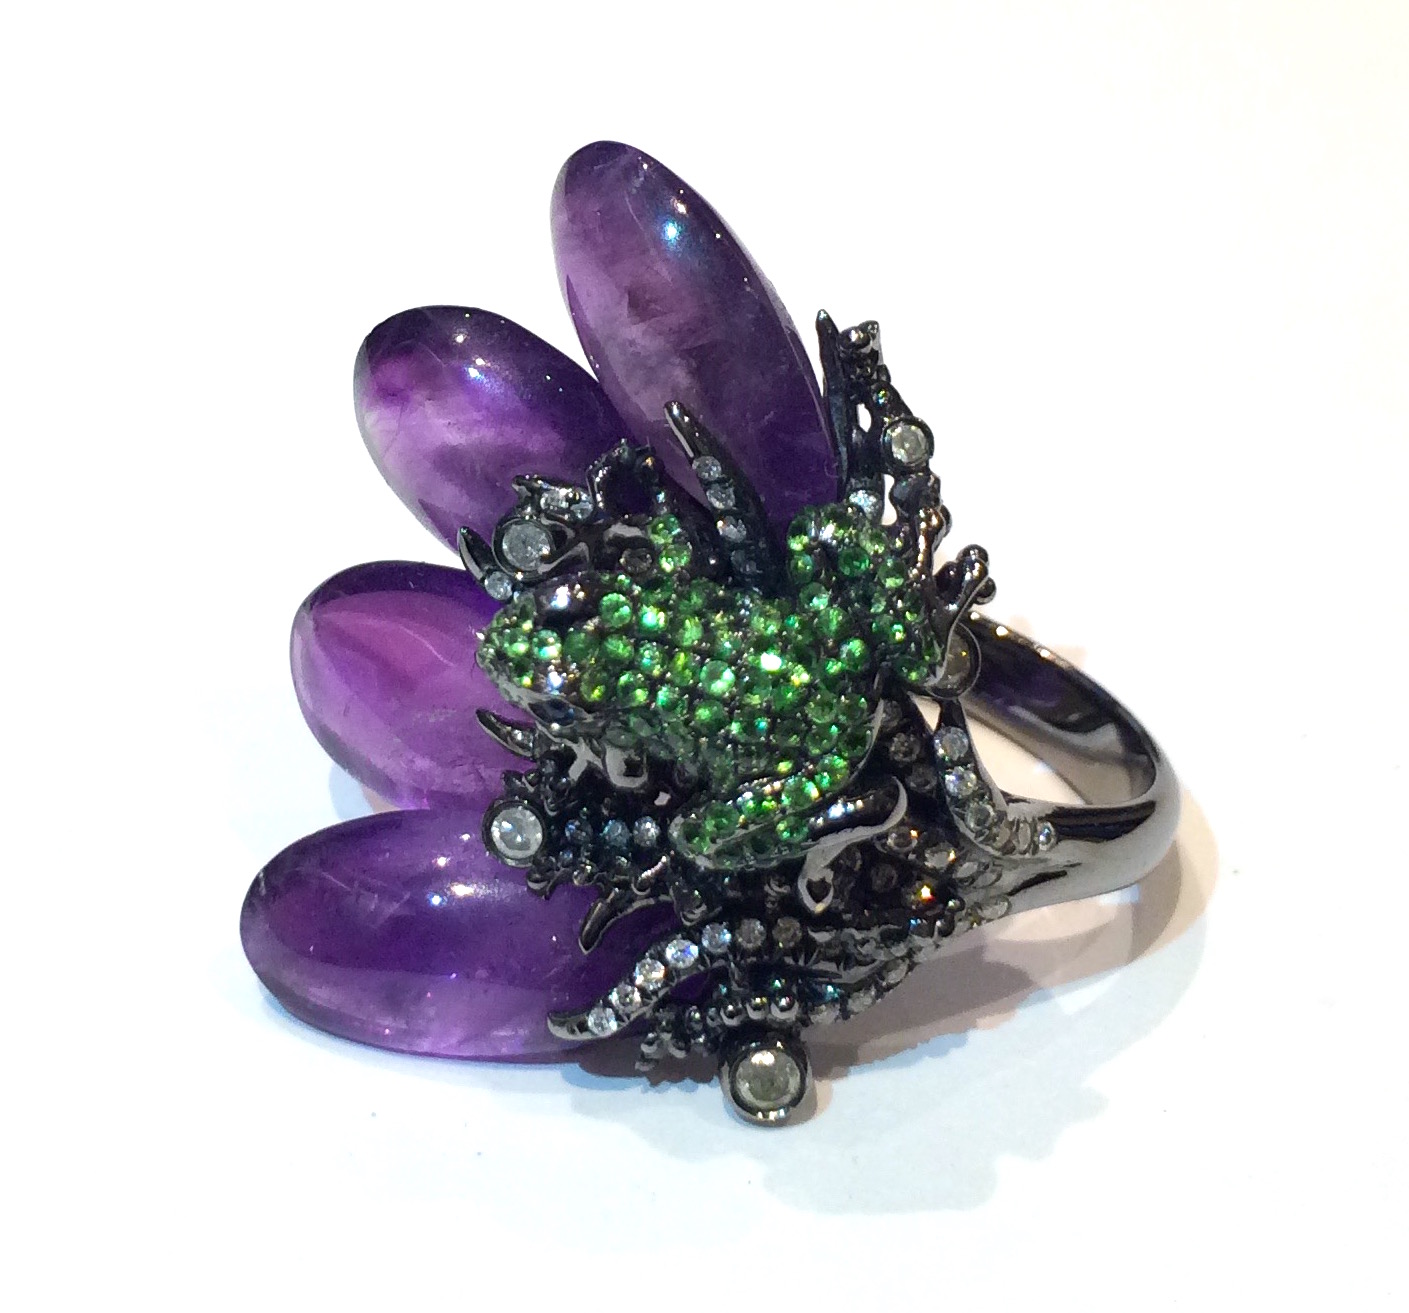 Asian Art Nouveau inspired “Frog on a Lily Pad” ring, 18K white gold with a gunmetal surface, cabochon amethyst petals, a three dimensional frogs pave set with tsavorites and sapphire eyes, diamond details, marked, c. 2005